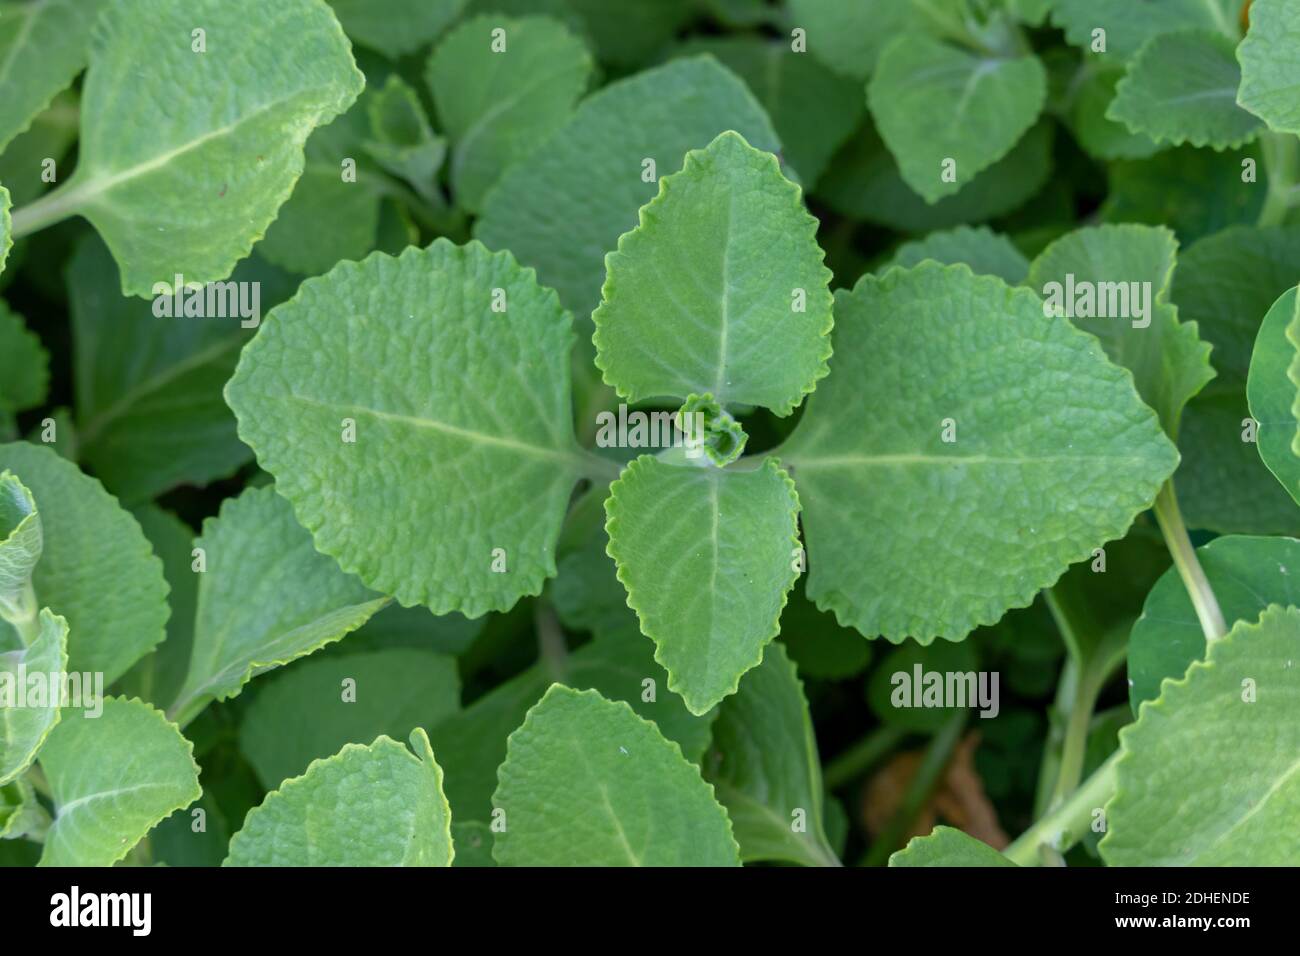 Plectranthus amboinicus medicinal and healthy plant. Stock Photo